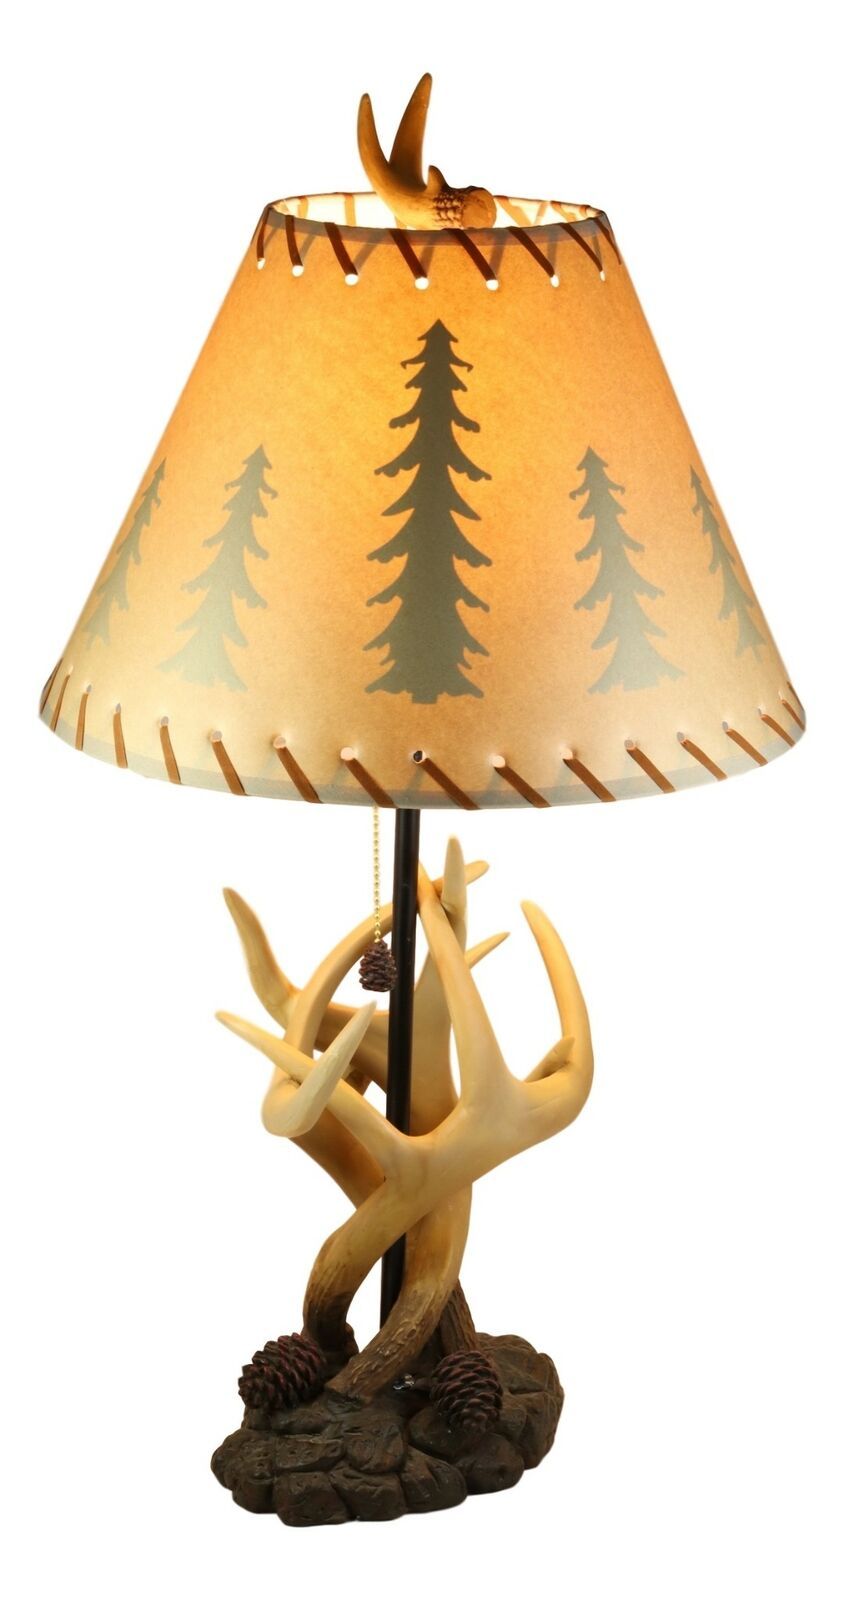 Ebros 26H Rustic Vintage Design 3 Entwined Antlers And Pine Cones Table Lamp